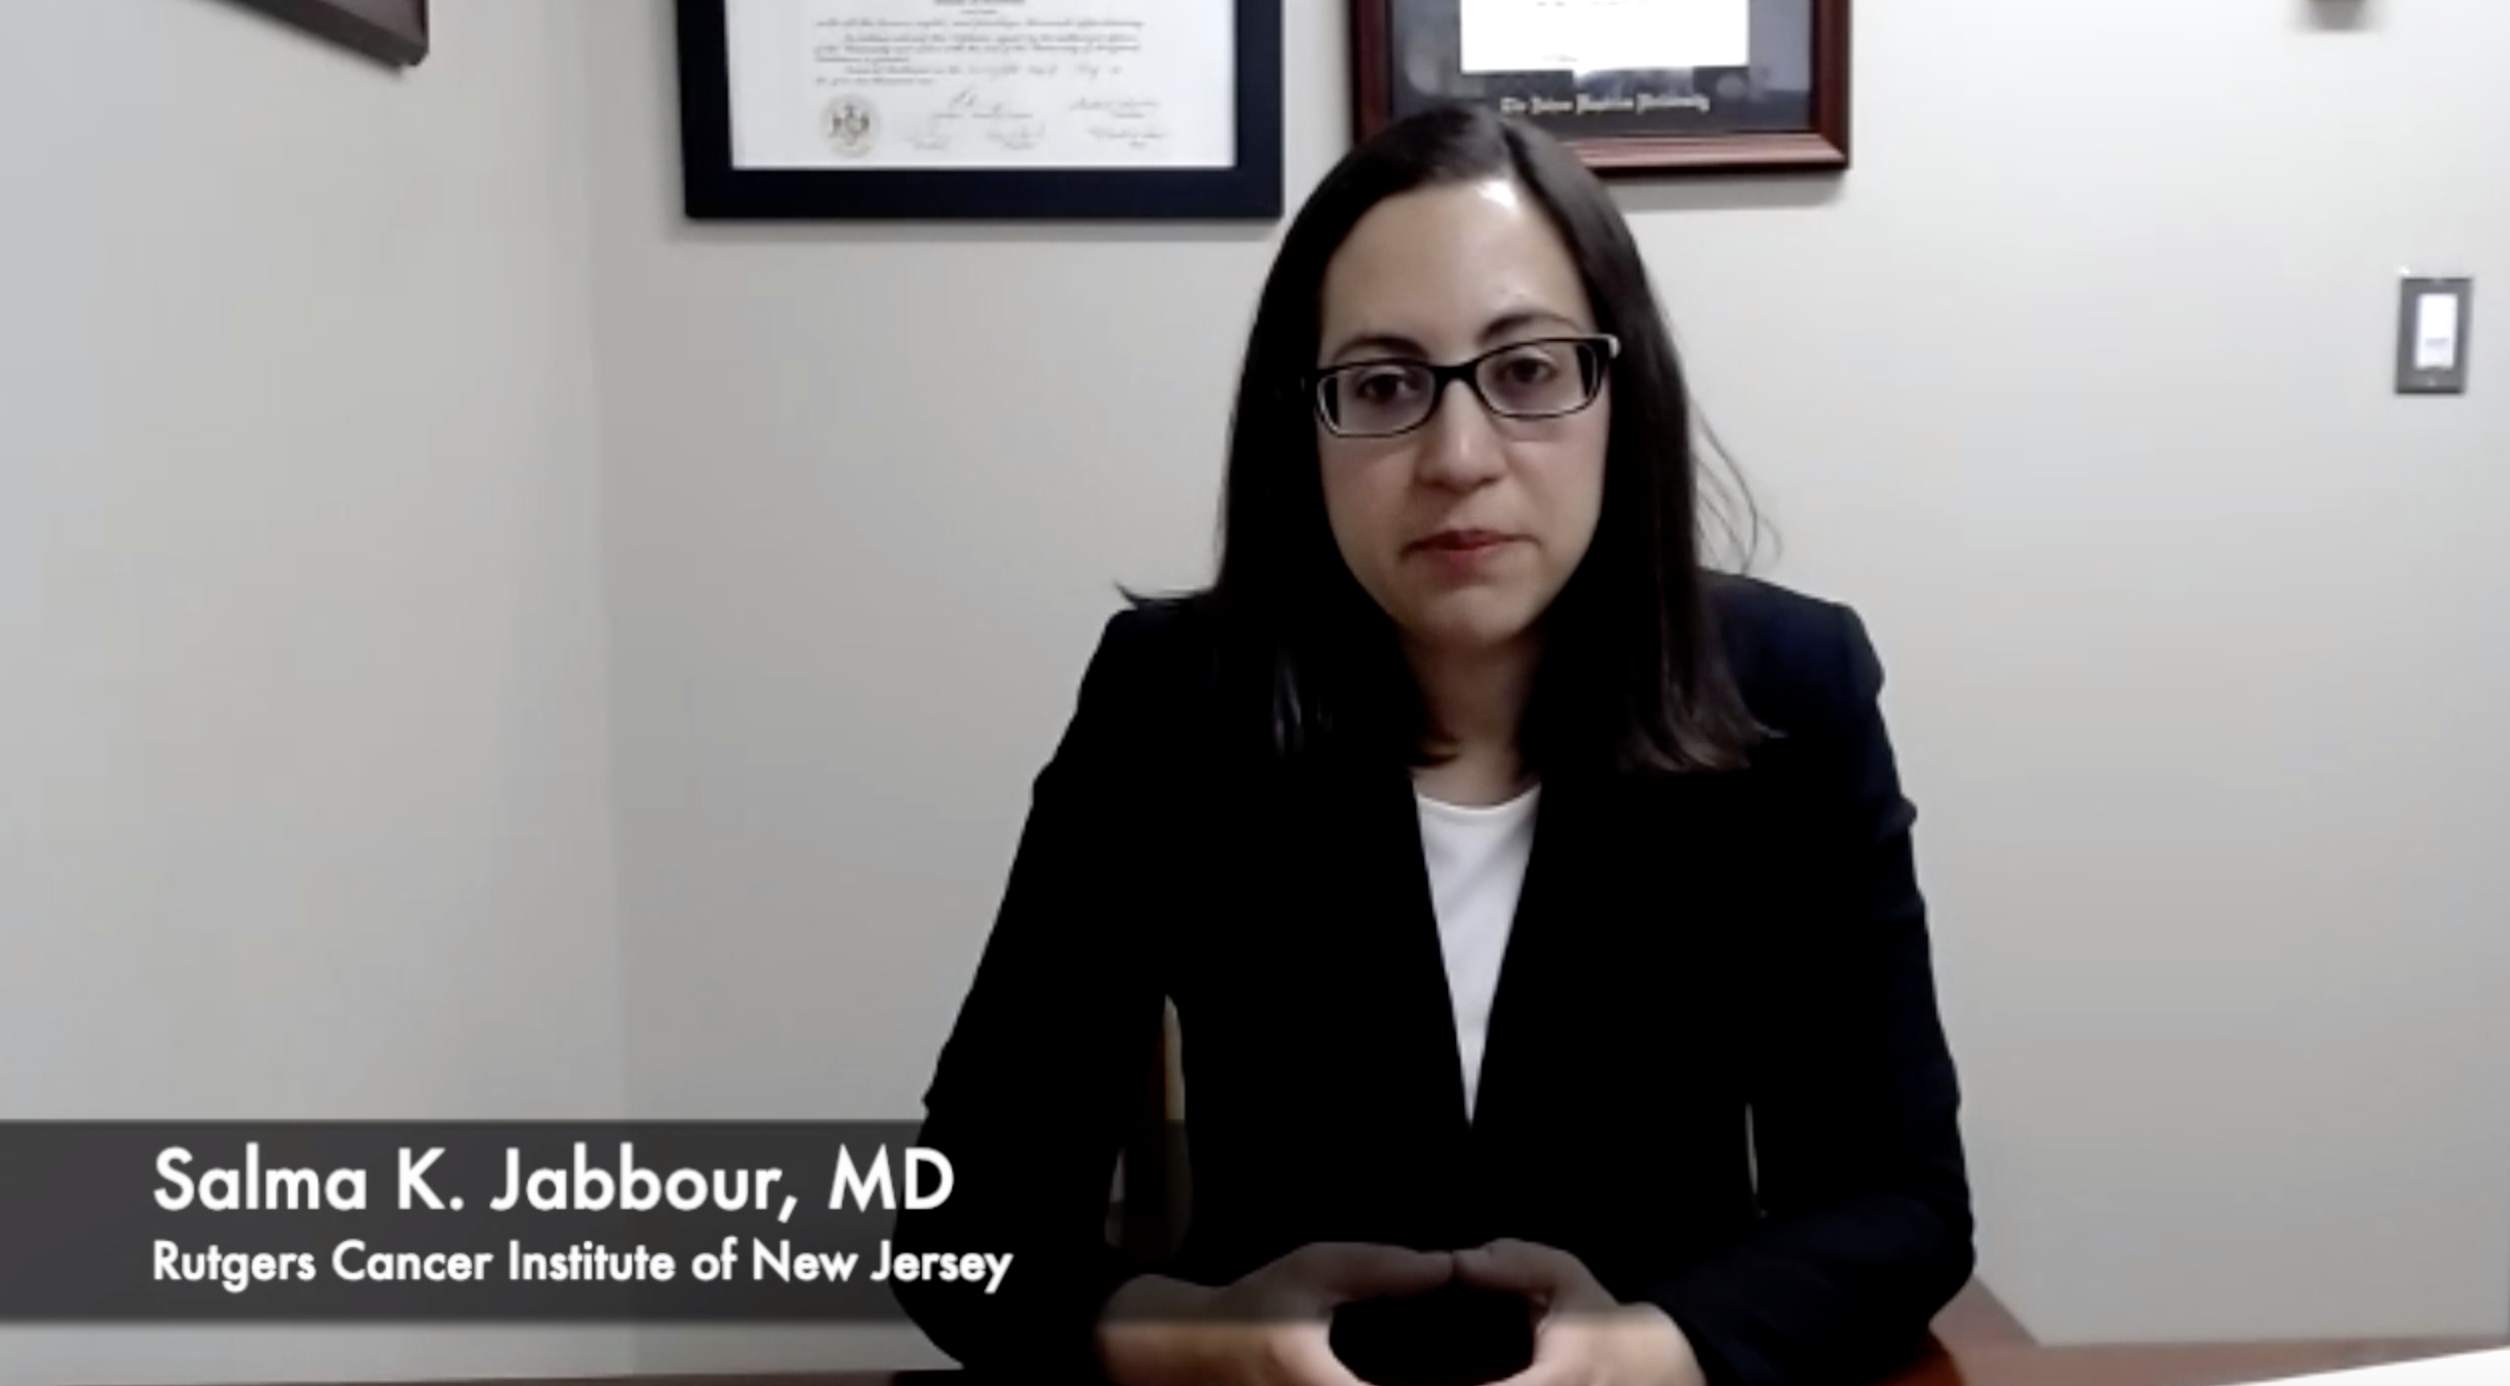 Salma K. Jabbour, MD, Discusses the Value of Treating Patients With NSCLC in a Multidisciplinary Setting